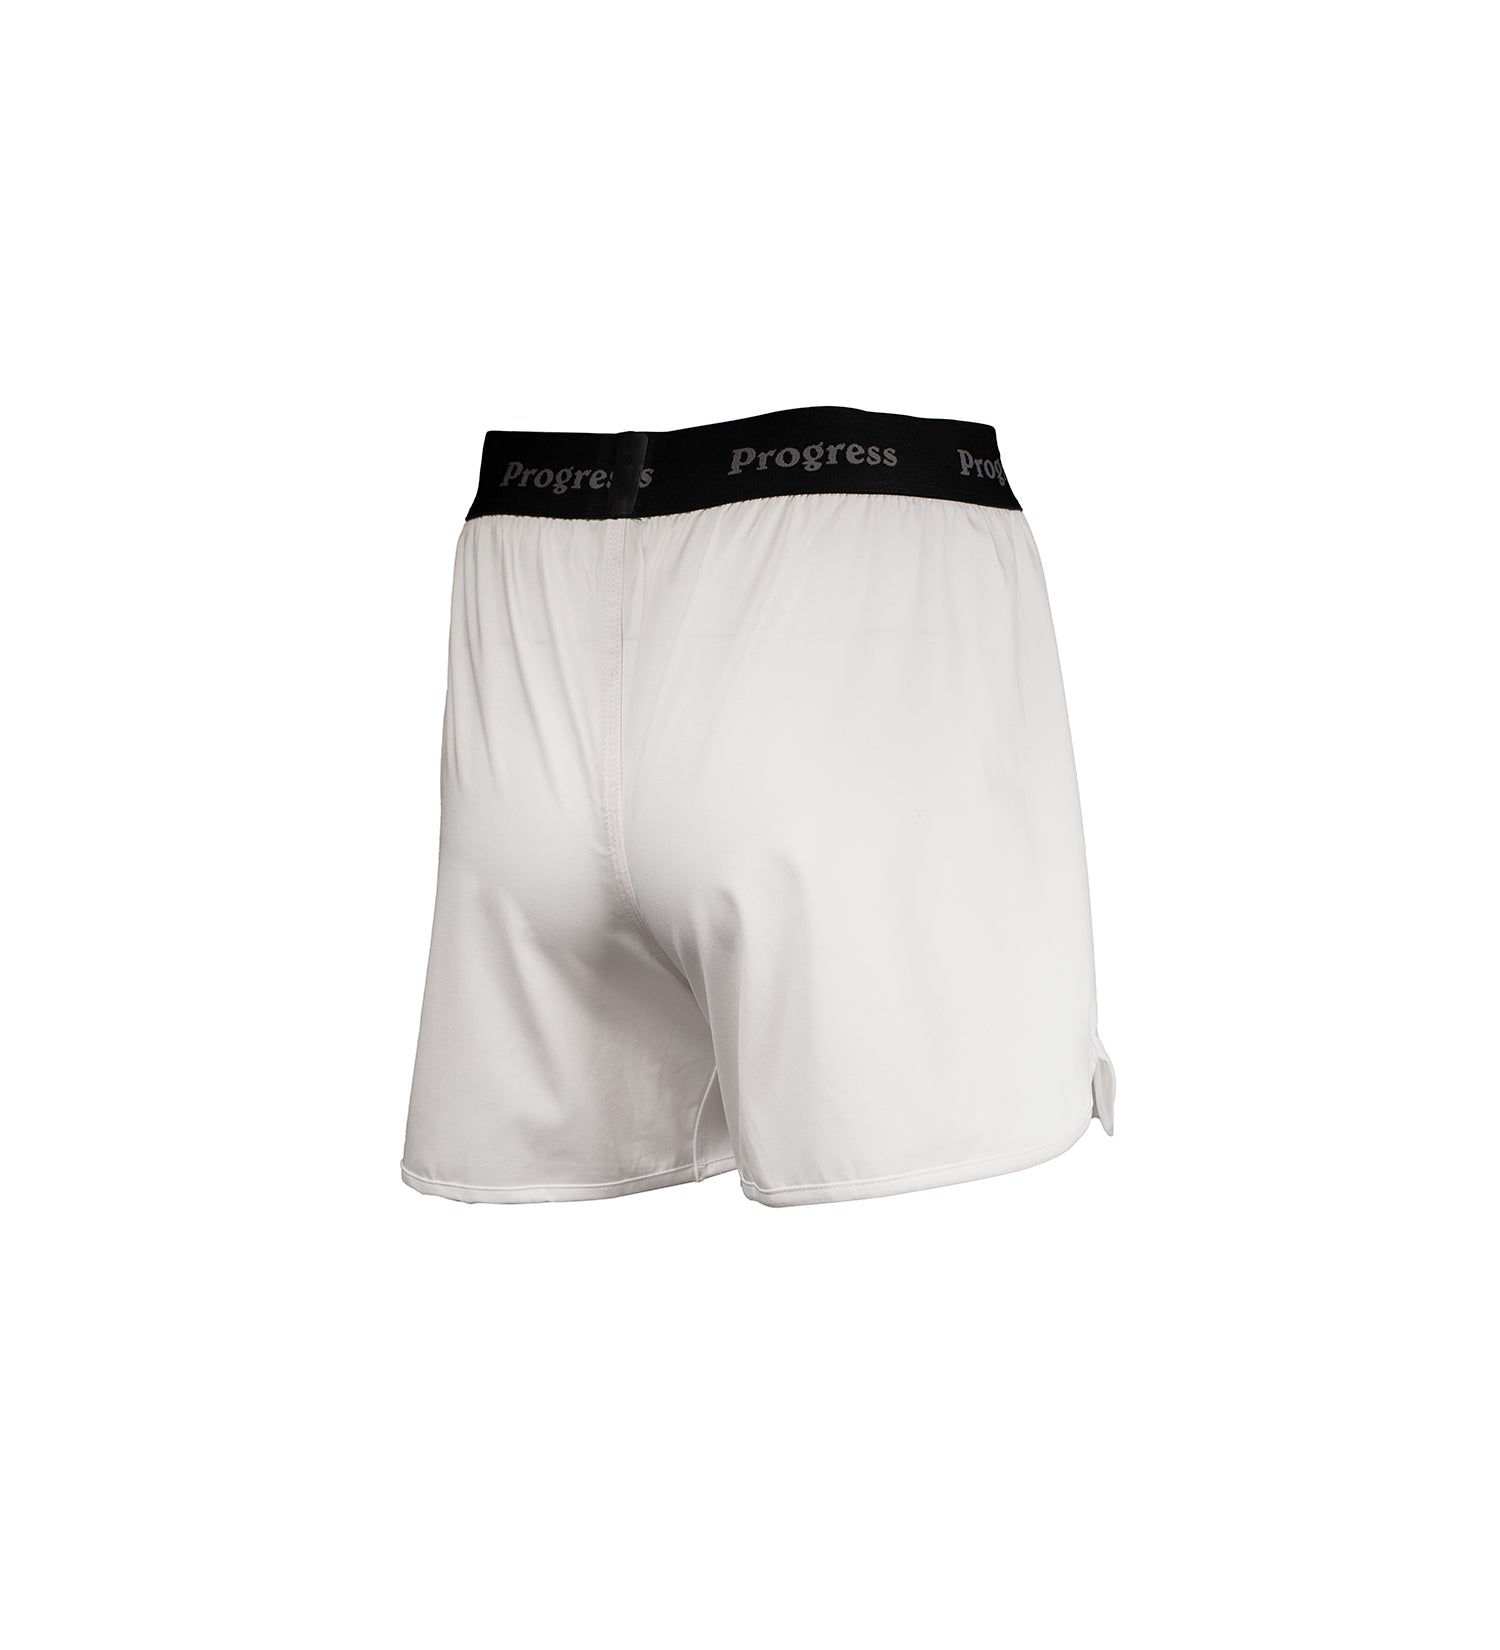 Panther Board Shorts - White